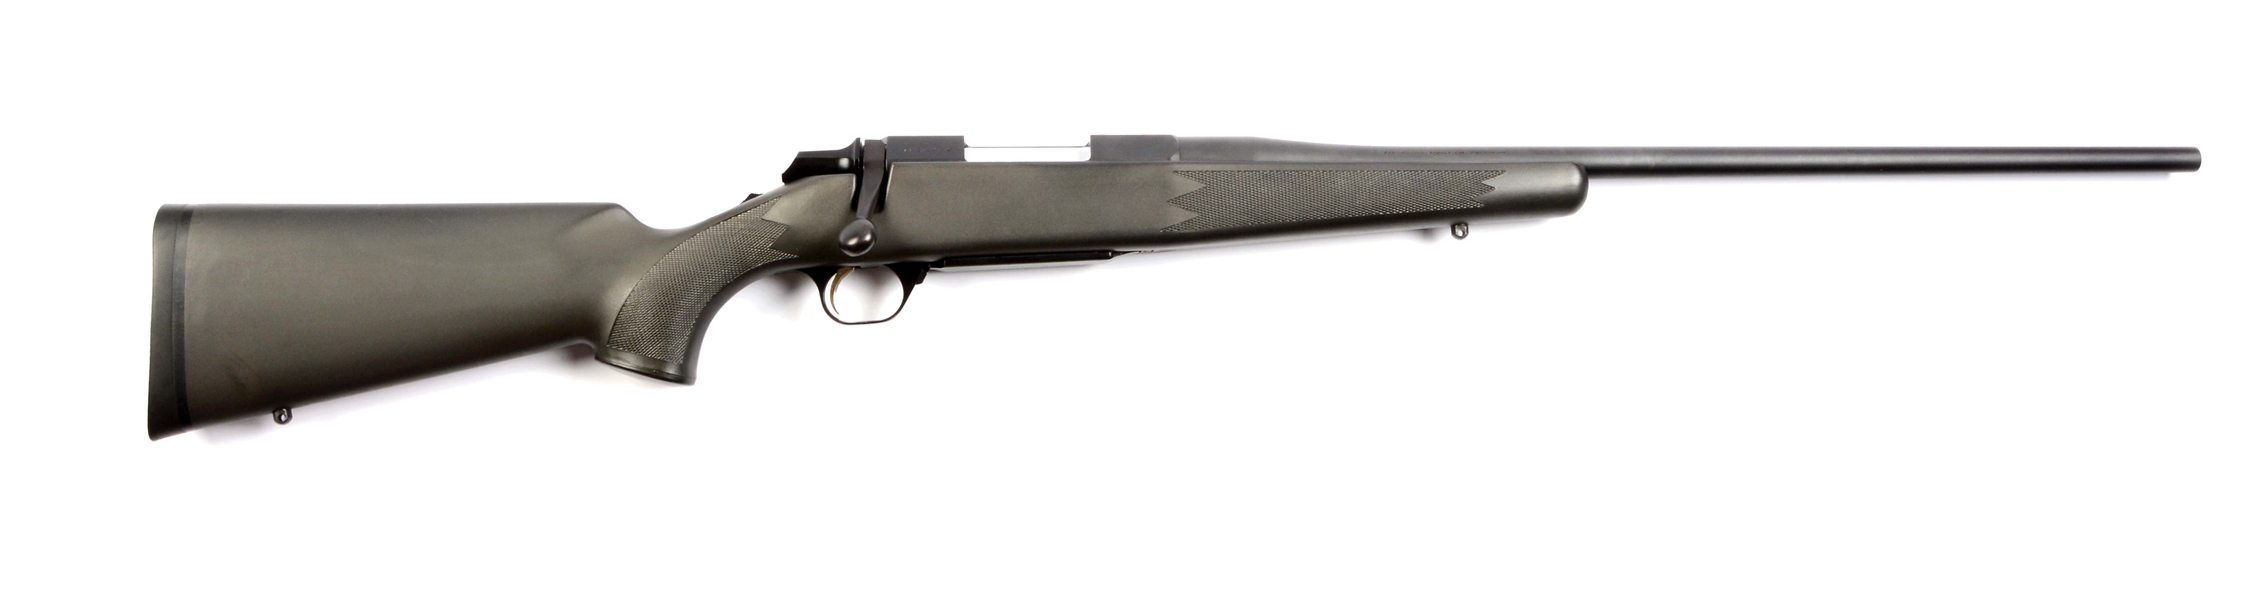 (M) BROWNING A-BOLT II BOLT ACTION RIFLE.